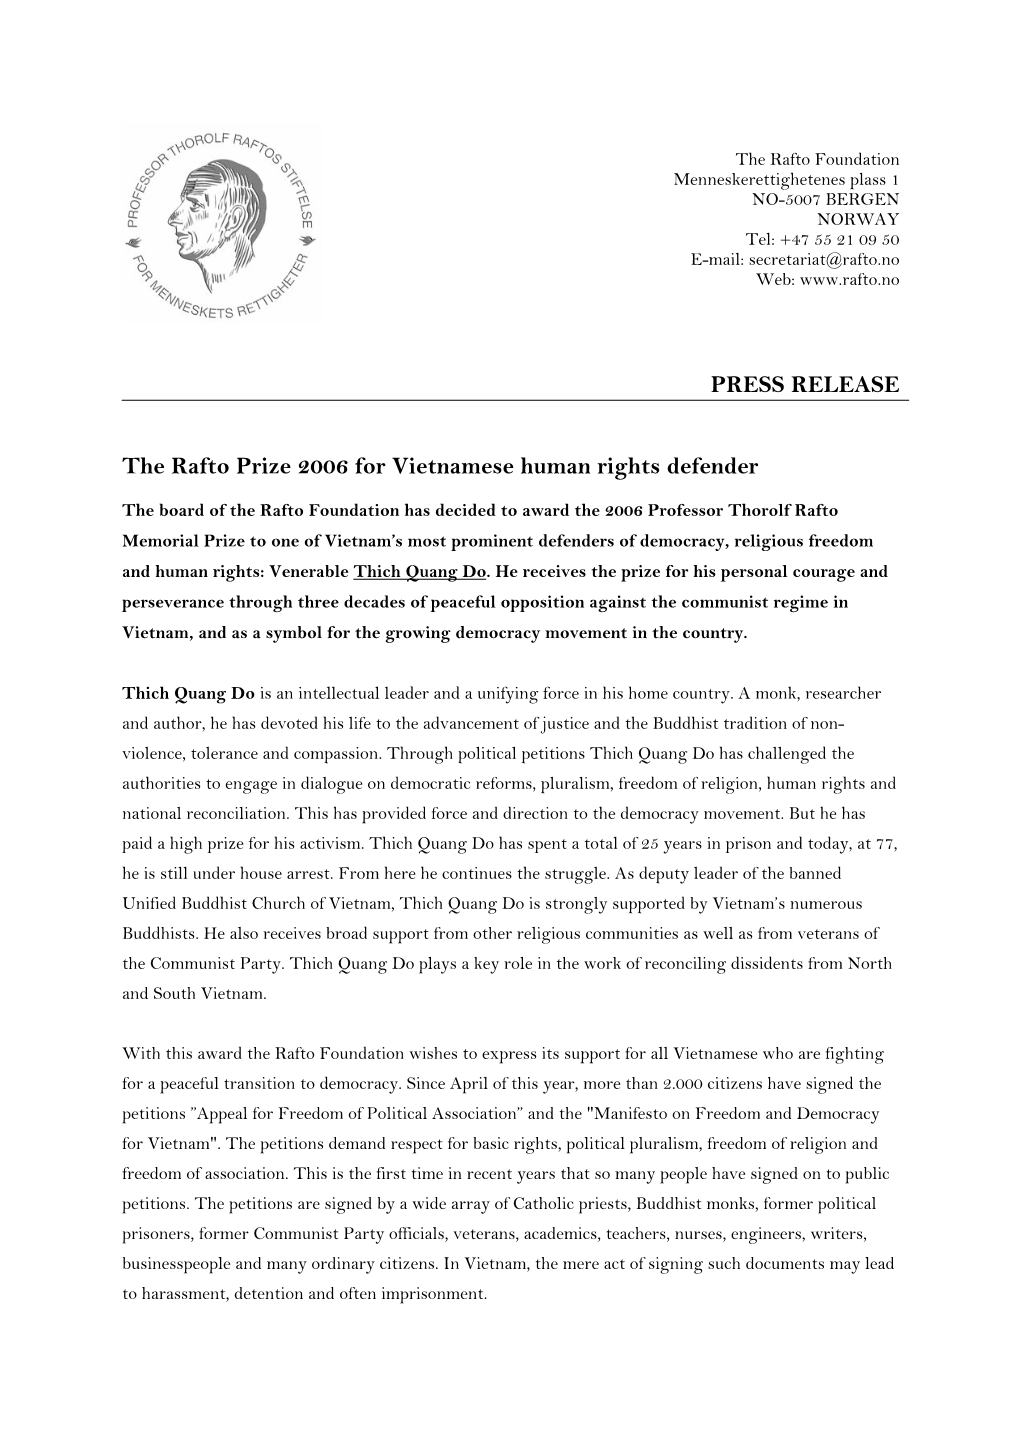 PRESS RELEASE the Rafto Prize 2006 for Vietnamese Human Rights